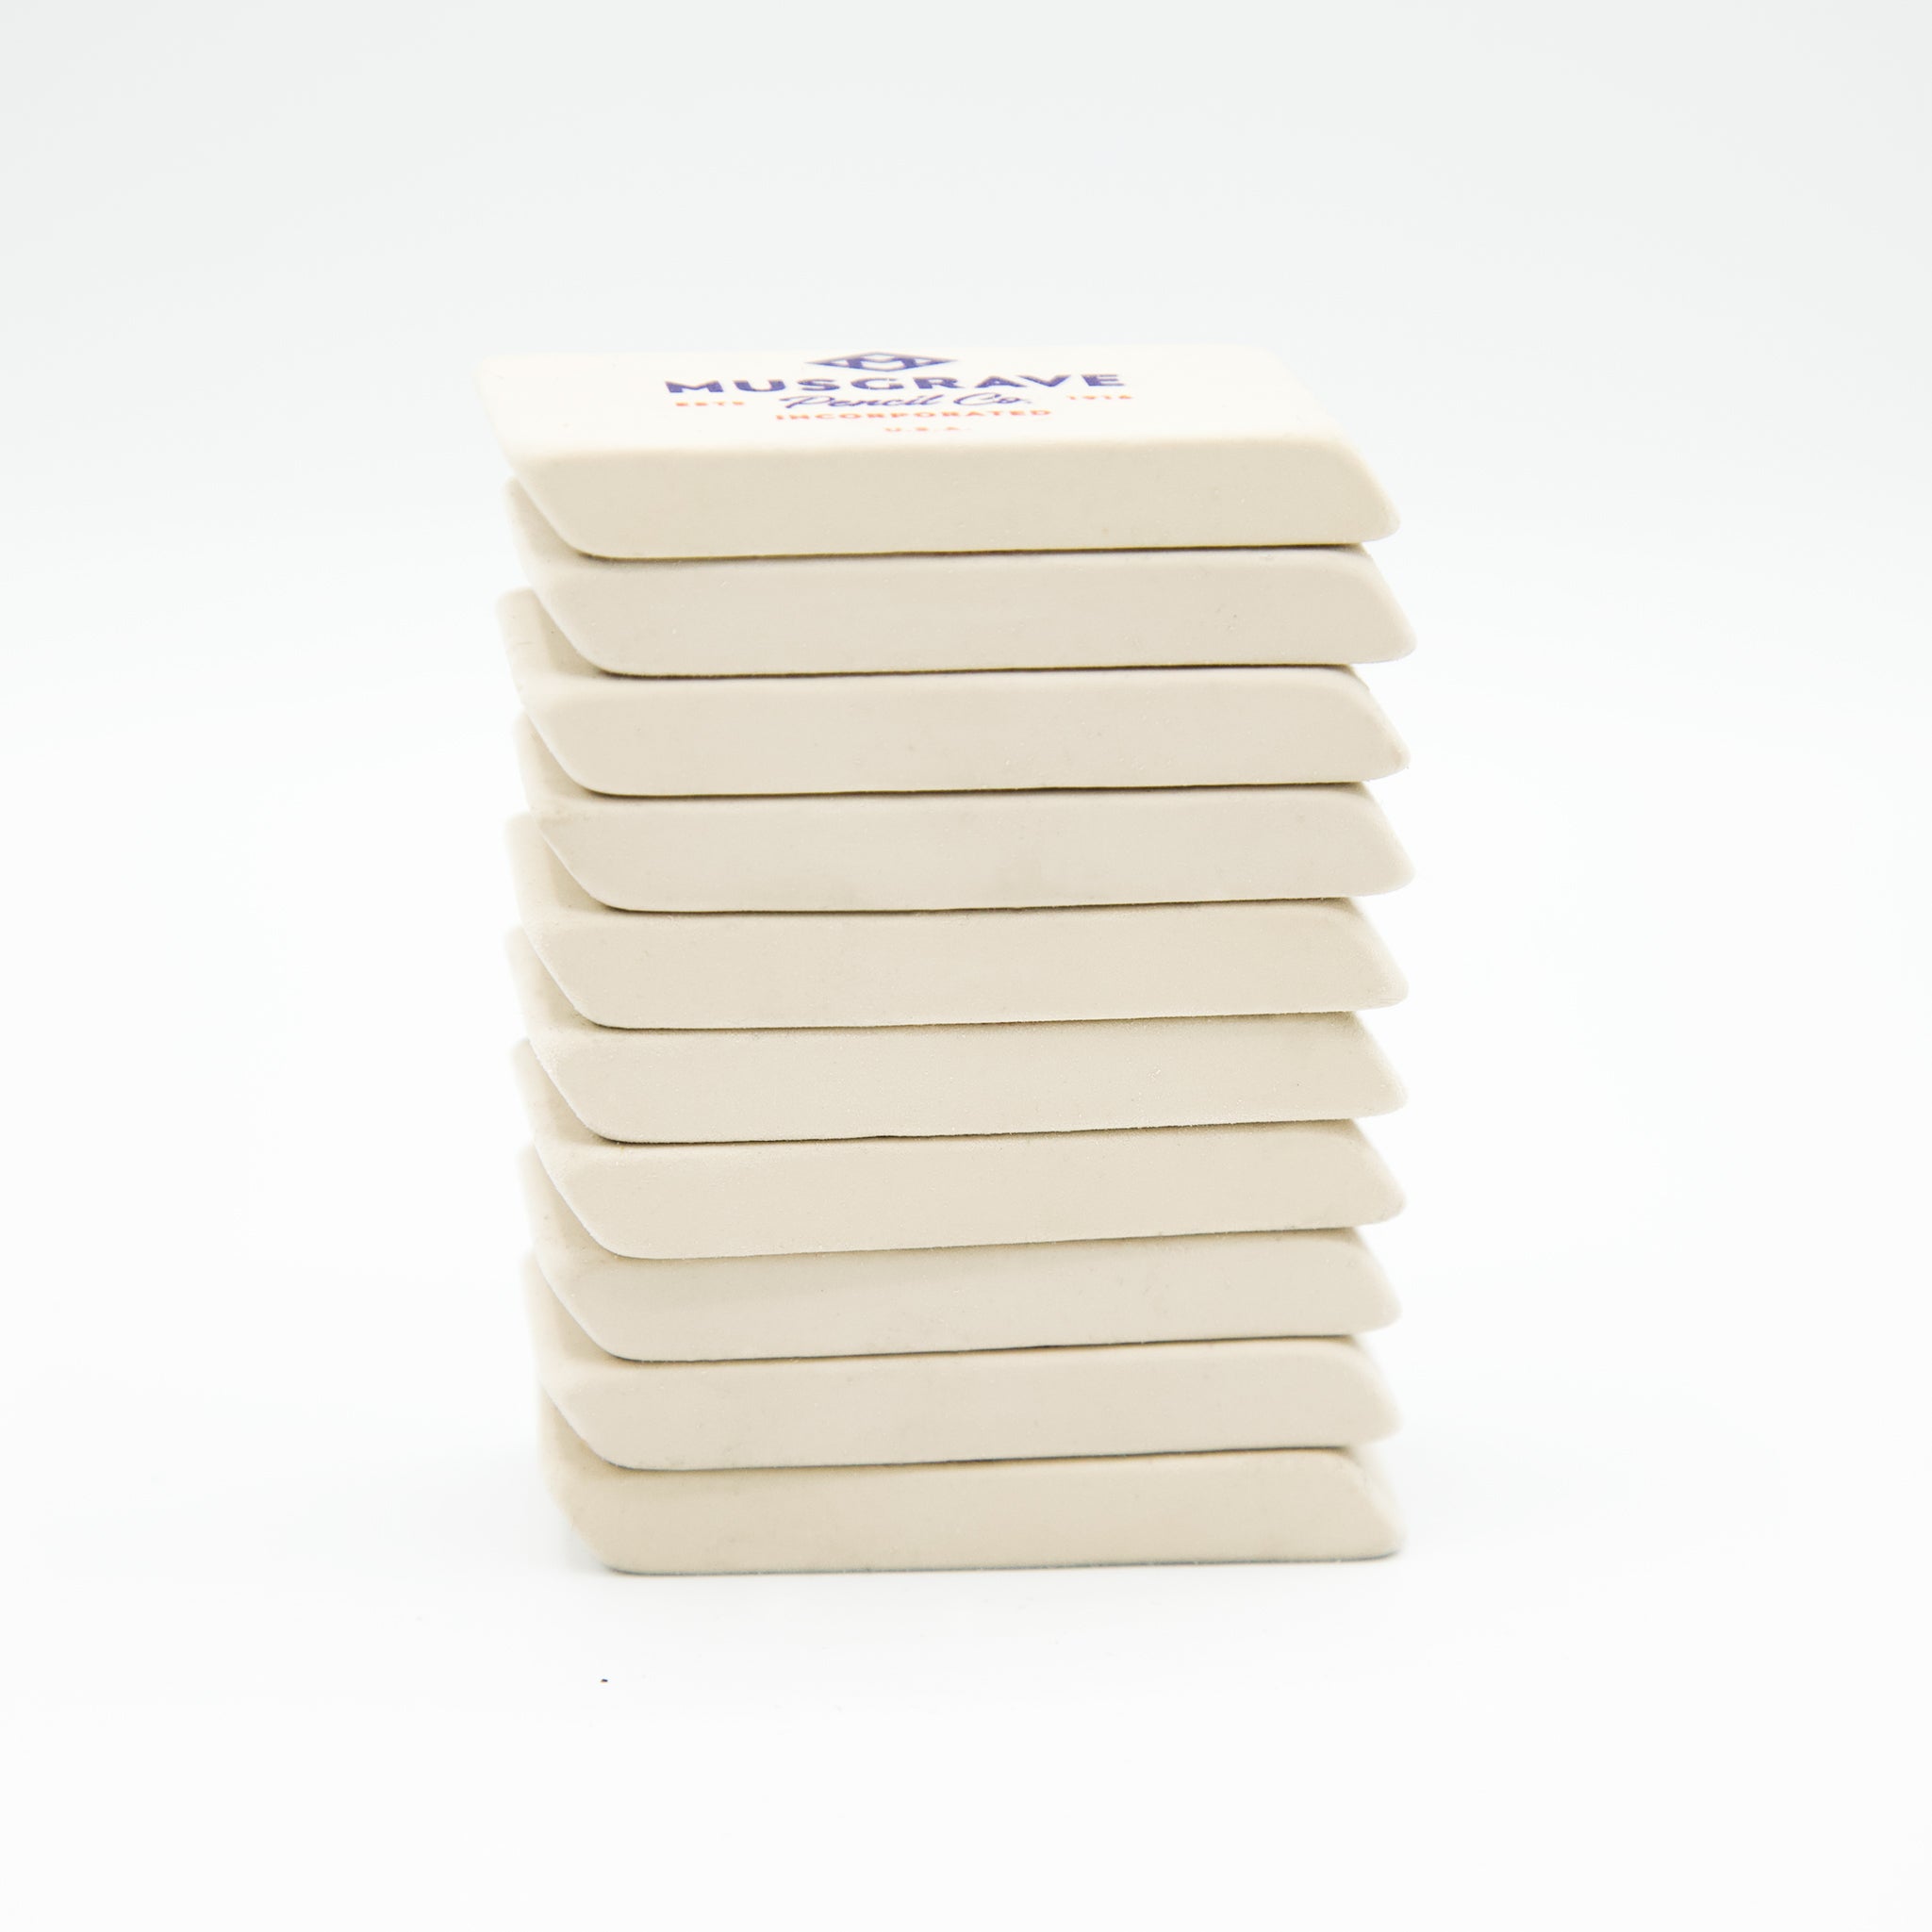 Musgrave-themed White Erasers - Eraser Pack of 10